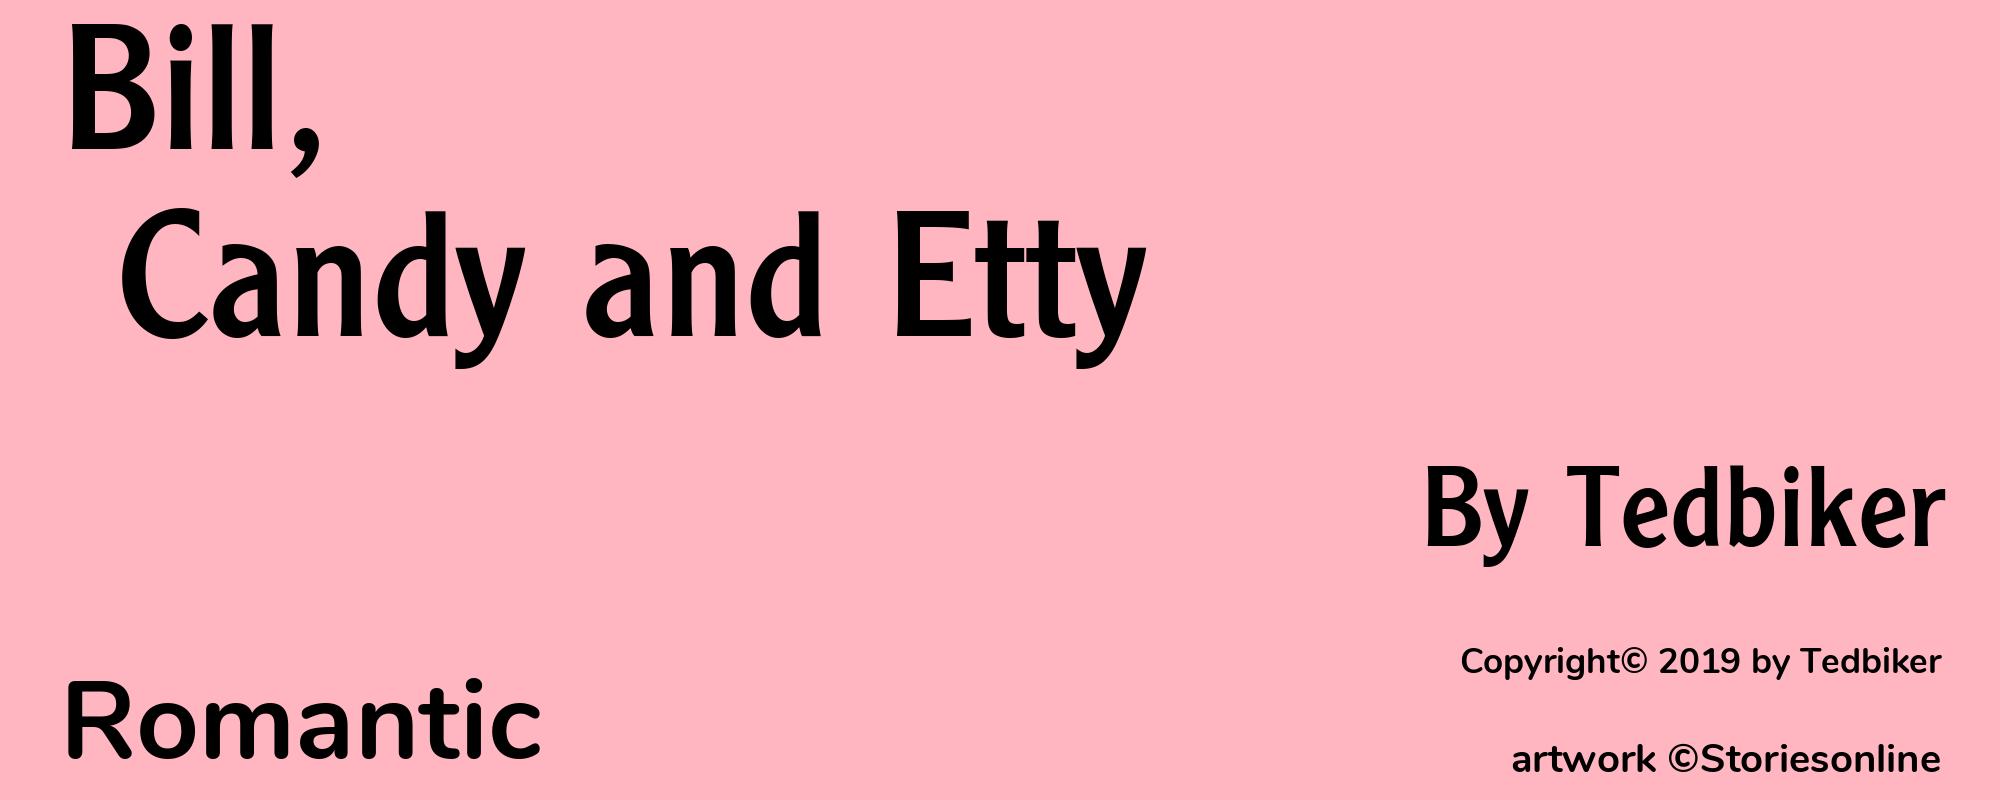 Bill, Candy and Etty - Cover